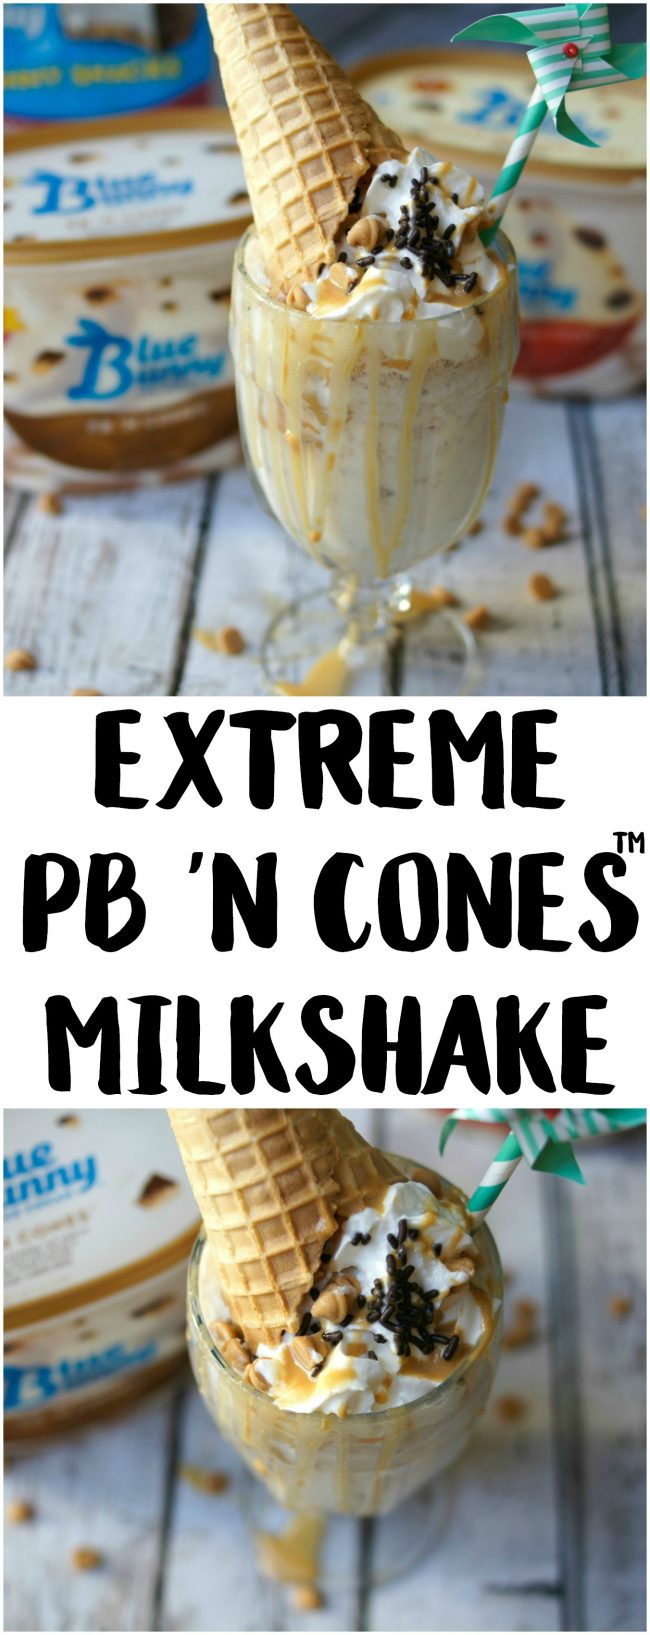 Have you ever had an extreme milkshake? They are popping up in restaurants around the world and each one of the ideas is more crazy than the next! Now you can DIY one at home, whether for parties or just desserts! This Extreme PB ‘N Cones Milkshake recipe is filled with peanut buttery goodness, a touch of chocolate sweets, and a real ice cream cone on top!